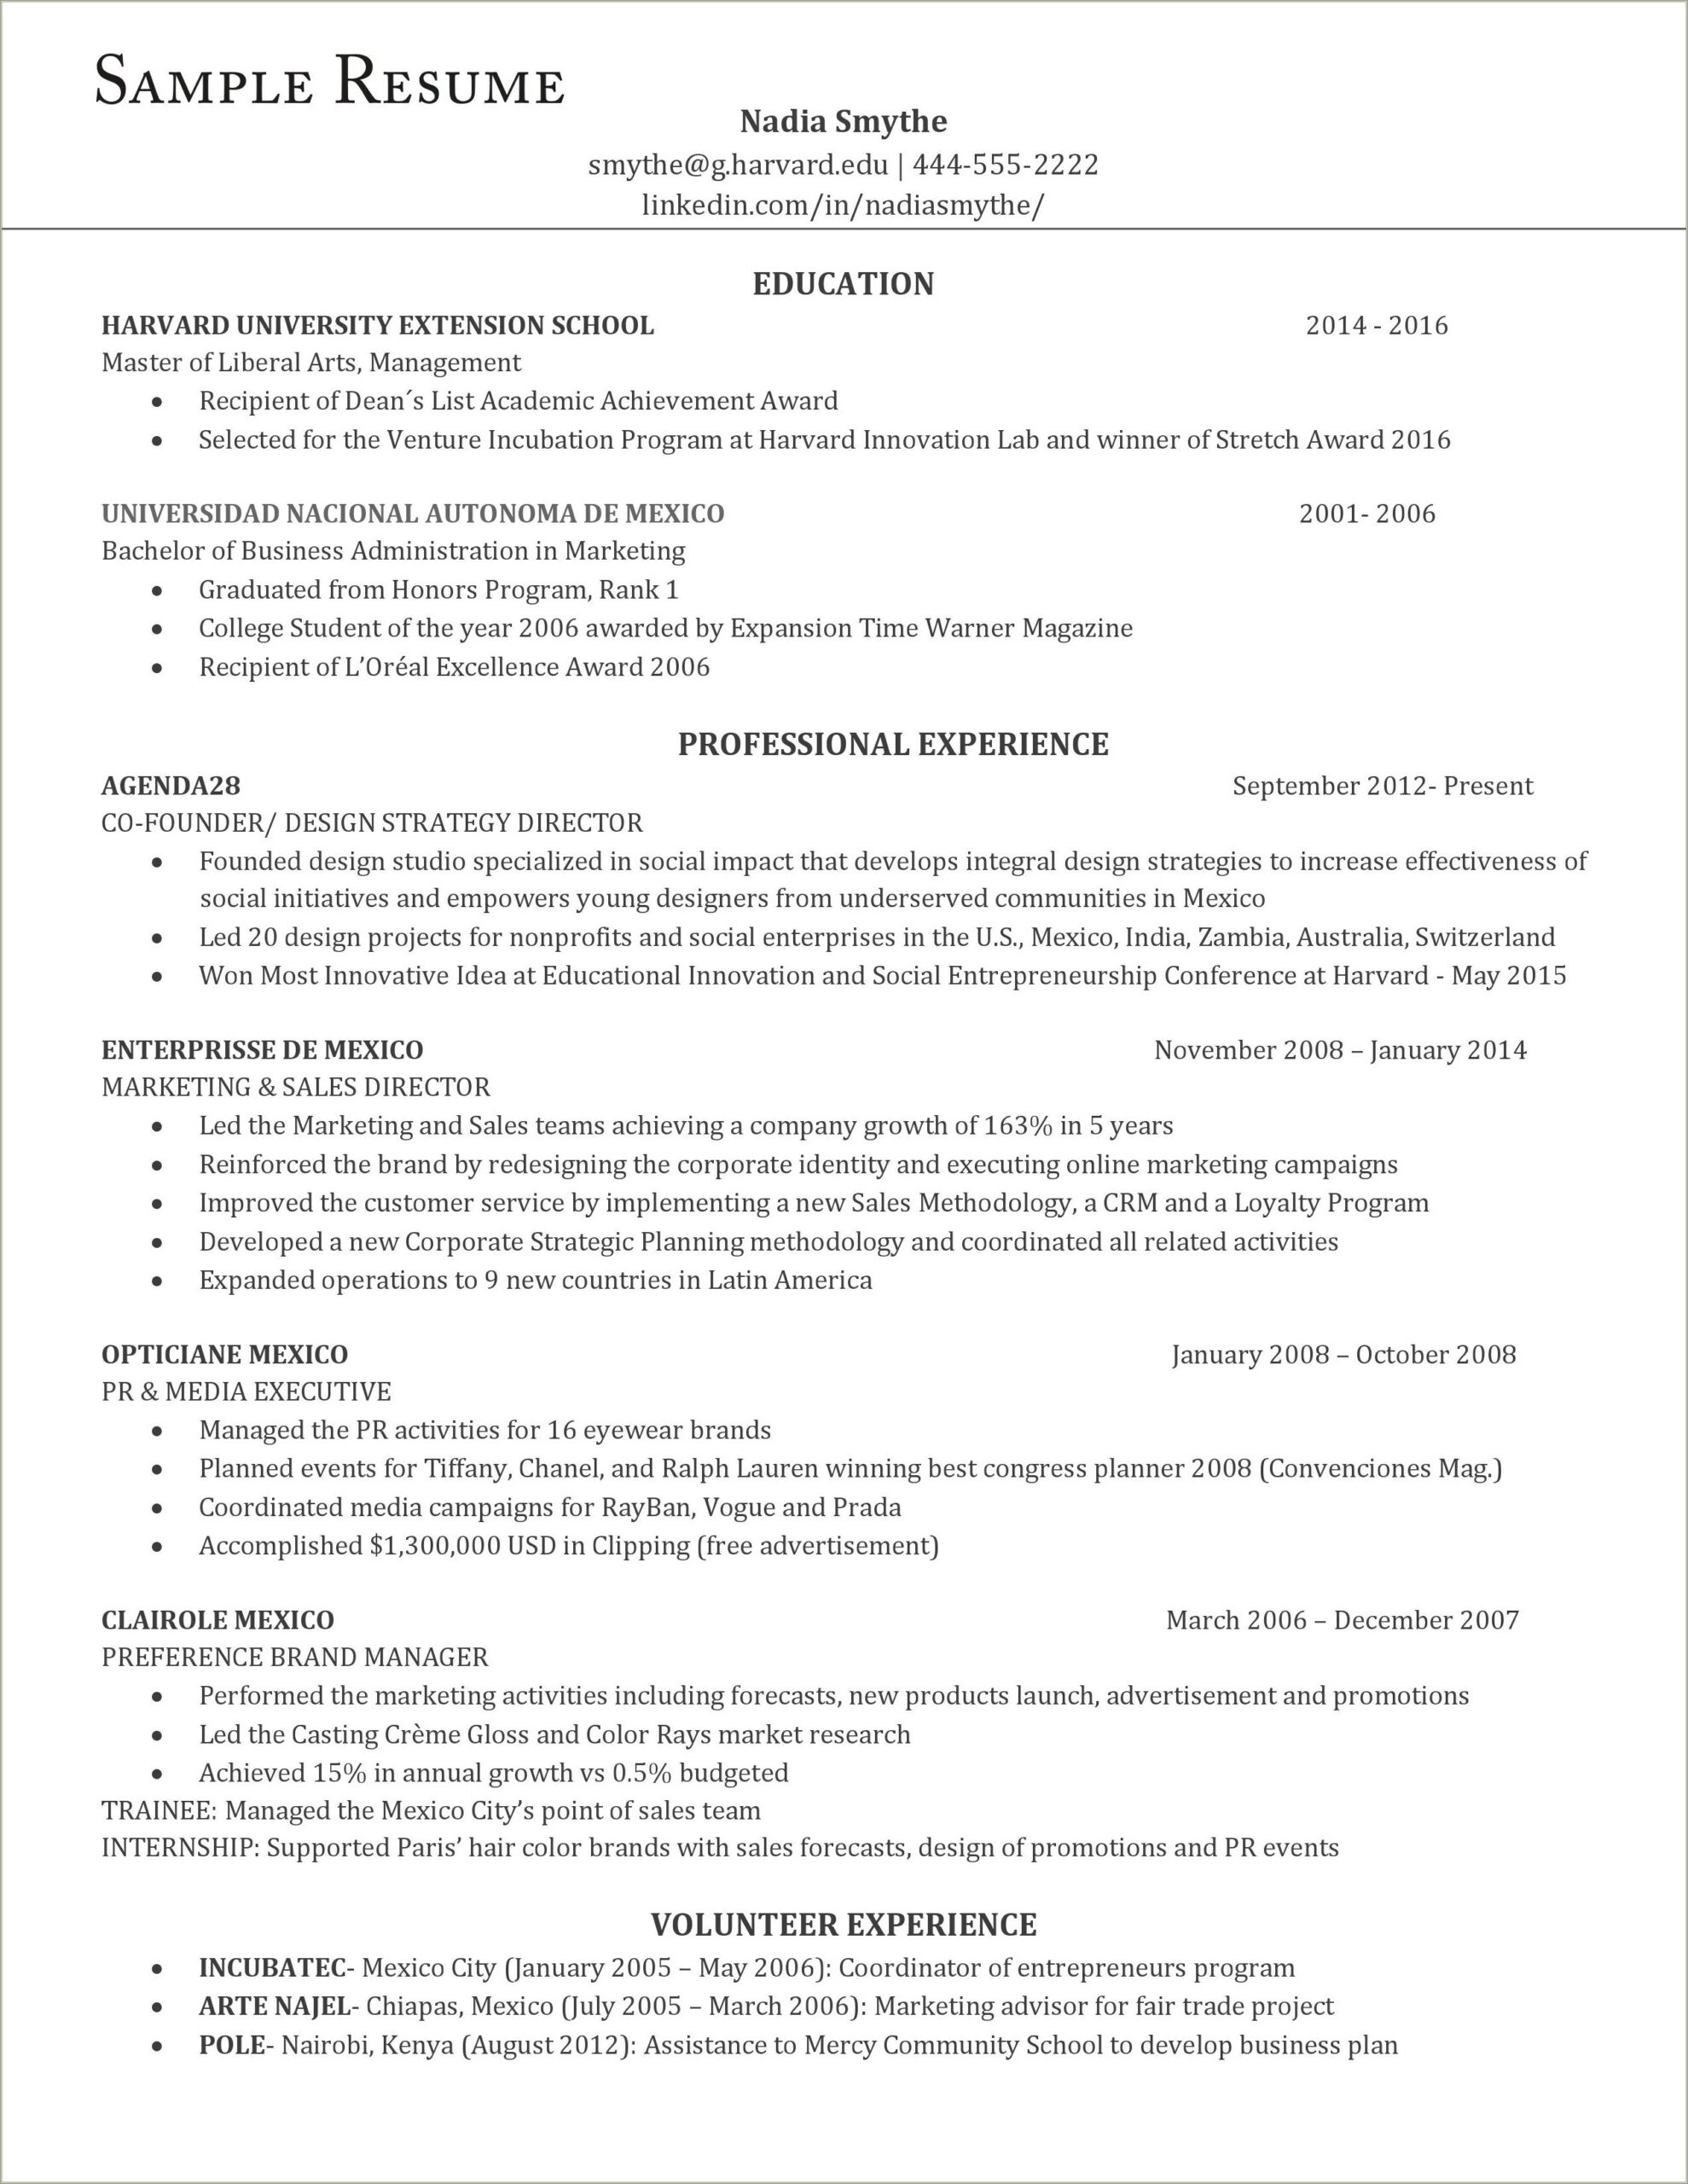 Sample Resume Skills For College Students